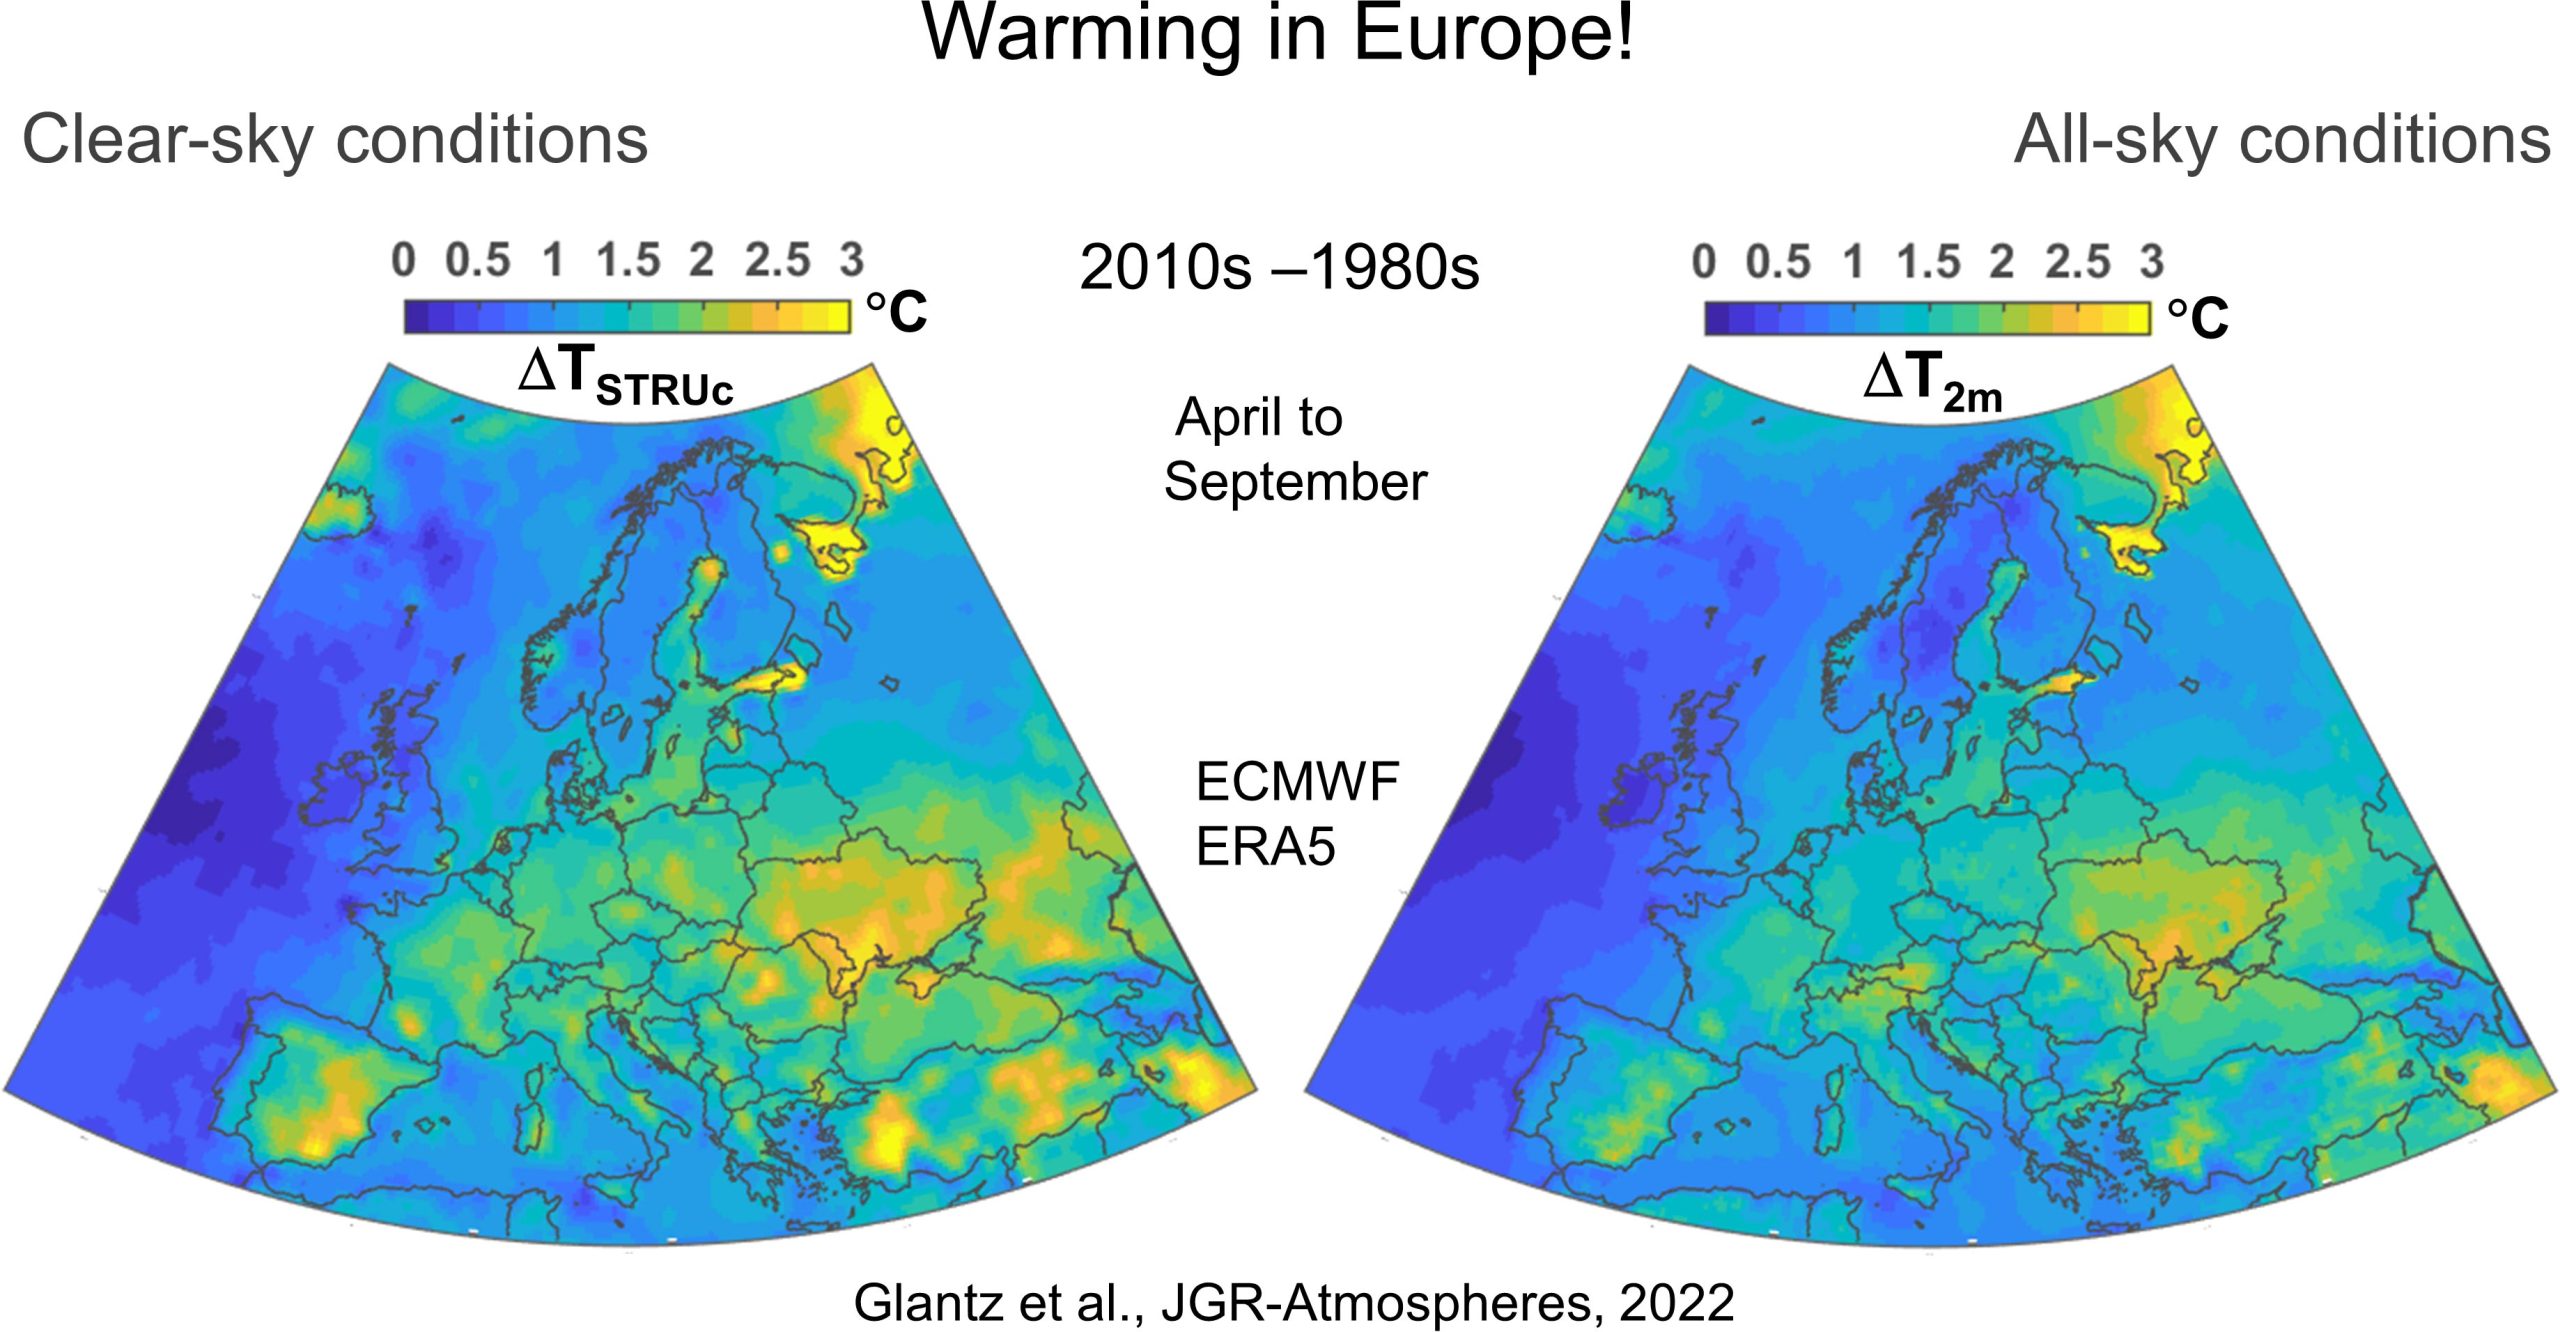 Large Parts of Europe Warming Twice As Fast as the Planet – Already Surpassed 2°C | Science